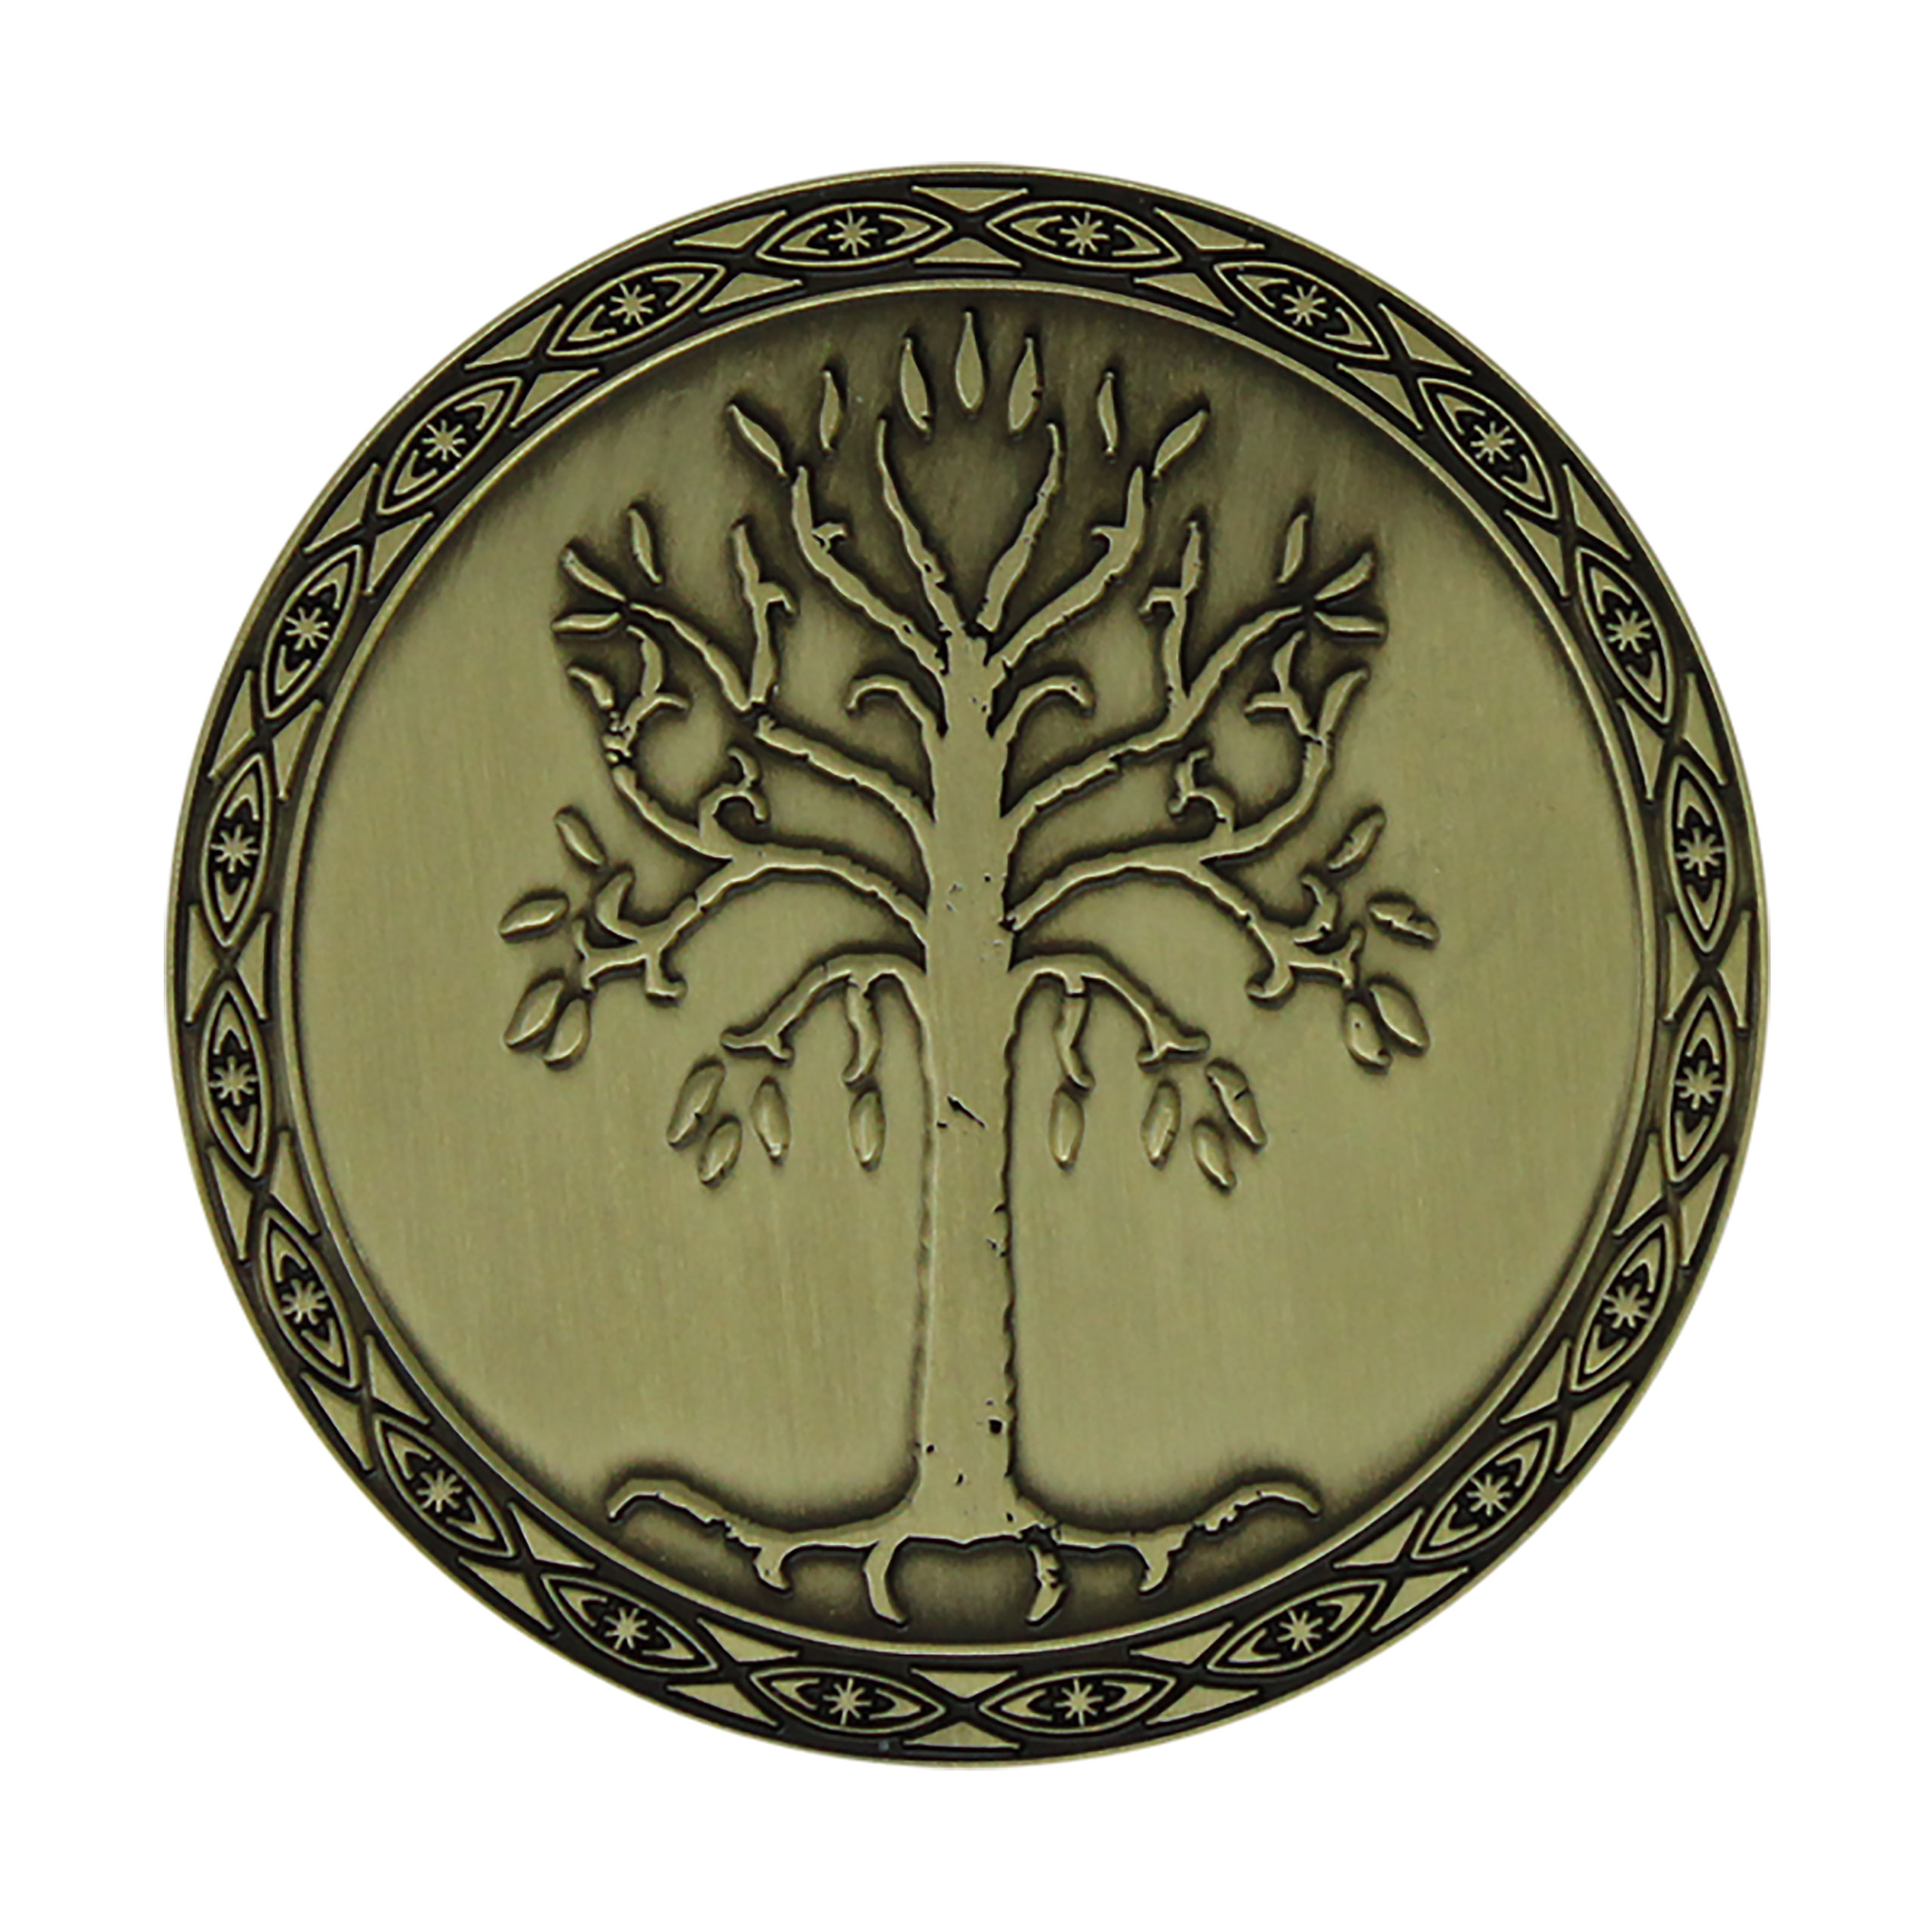 Lord of the Rings - Gondor Collector's Coin